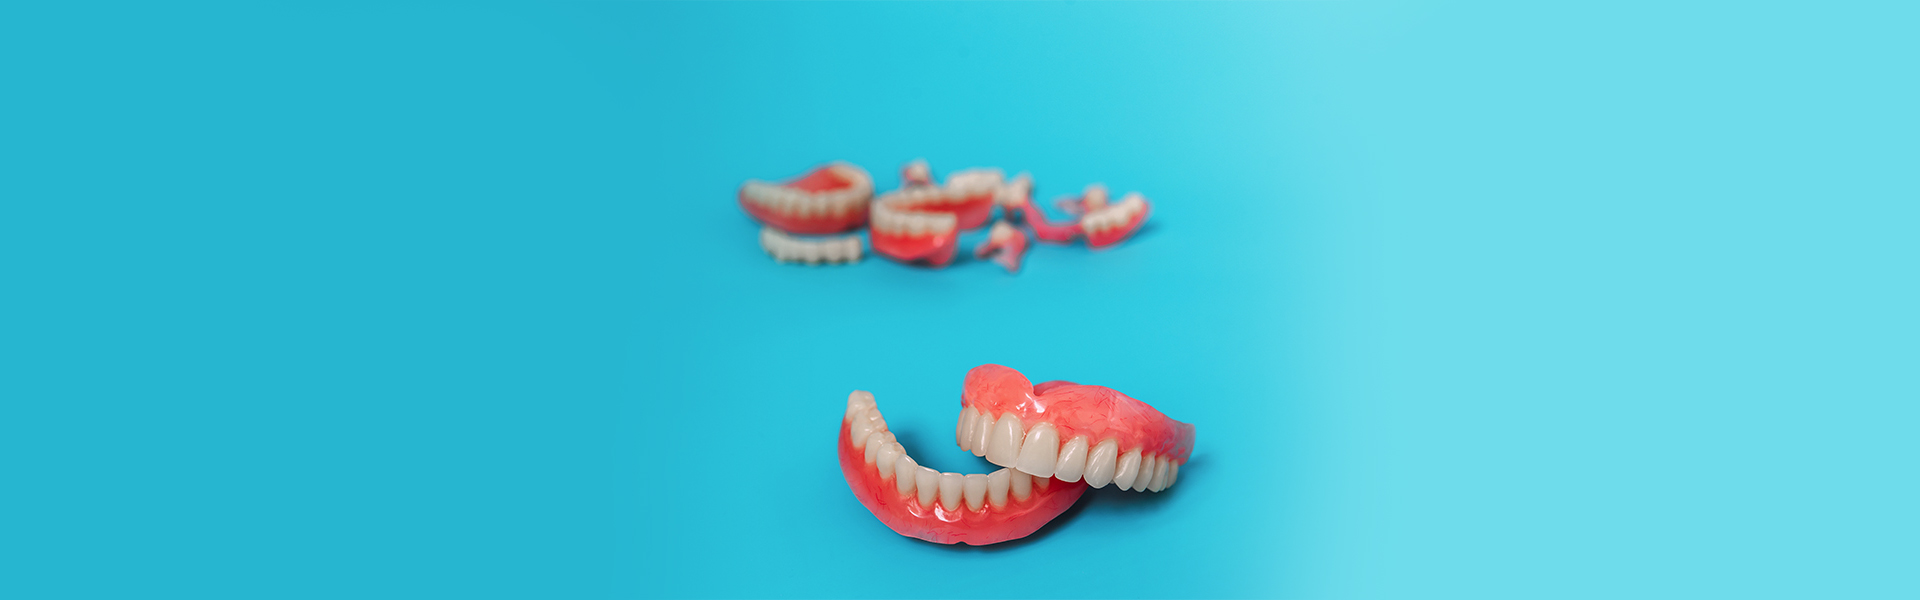 Denture Care 101: Maintaining Healthy and Comfortable Dentures